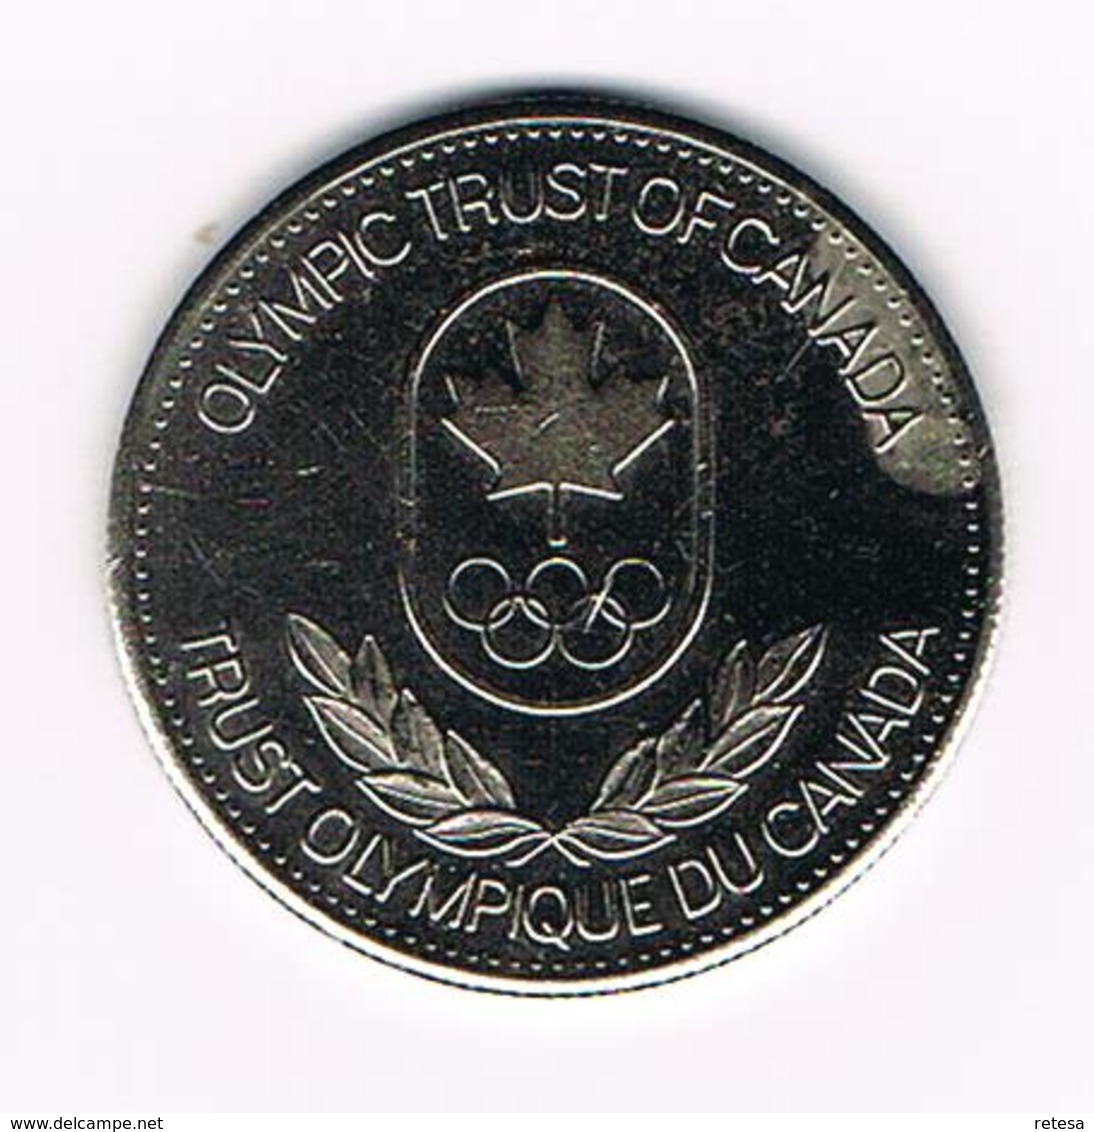 &  PENNING OLYMPIC TRUST OF CANADA  YACHTING 1980 - Pièces écrasées (Elongated Coins)